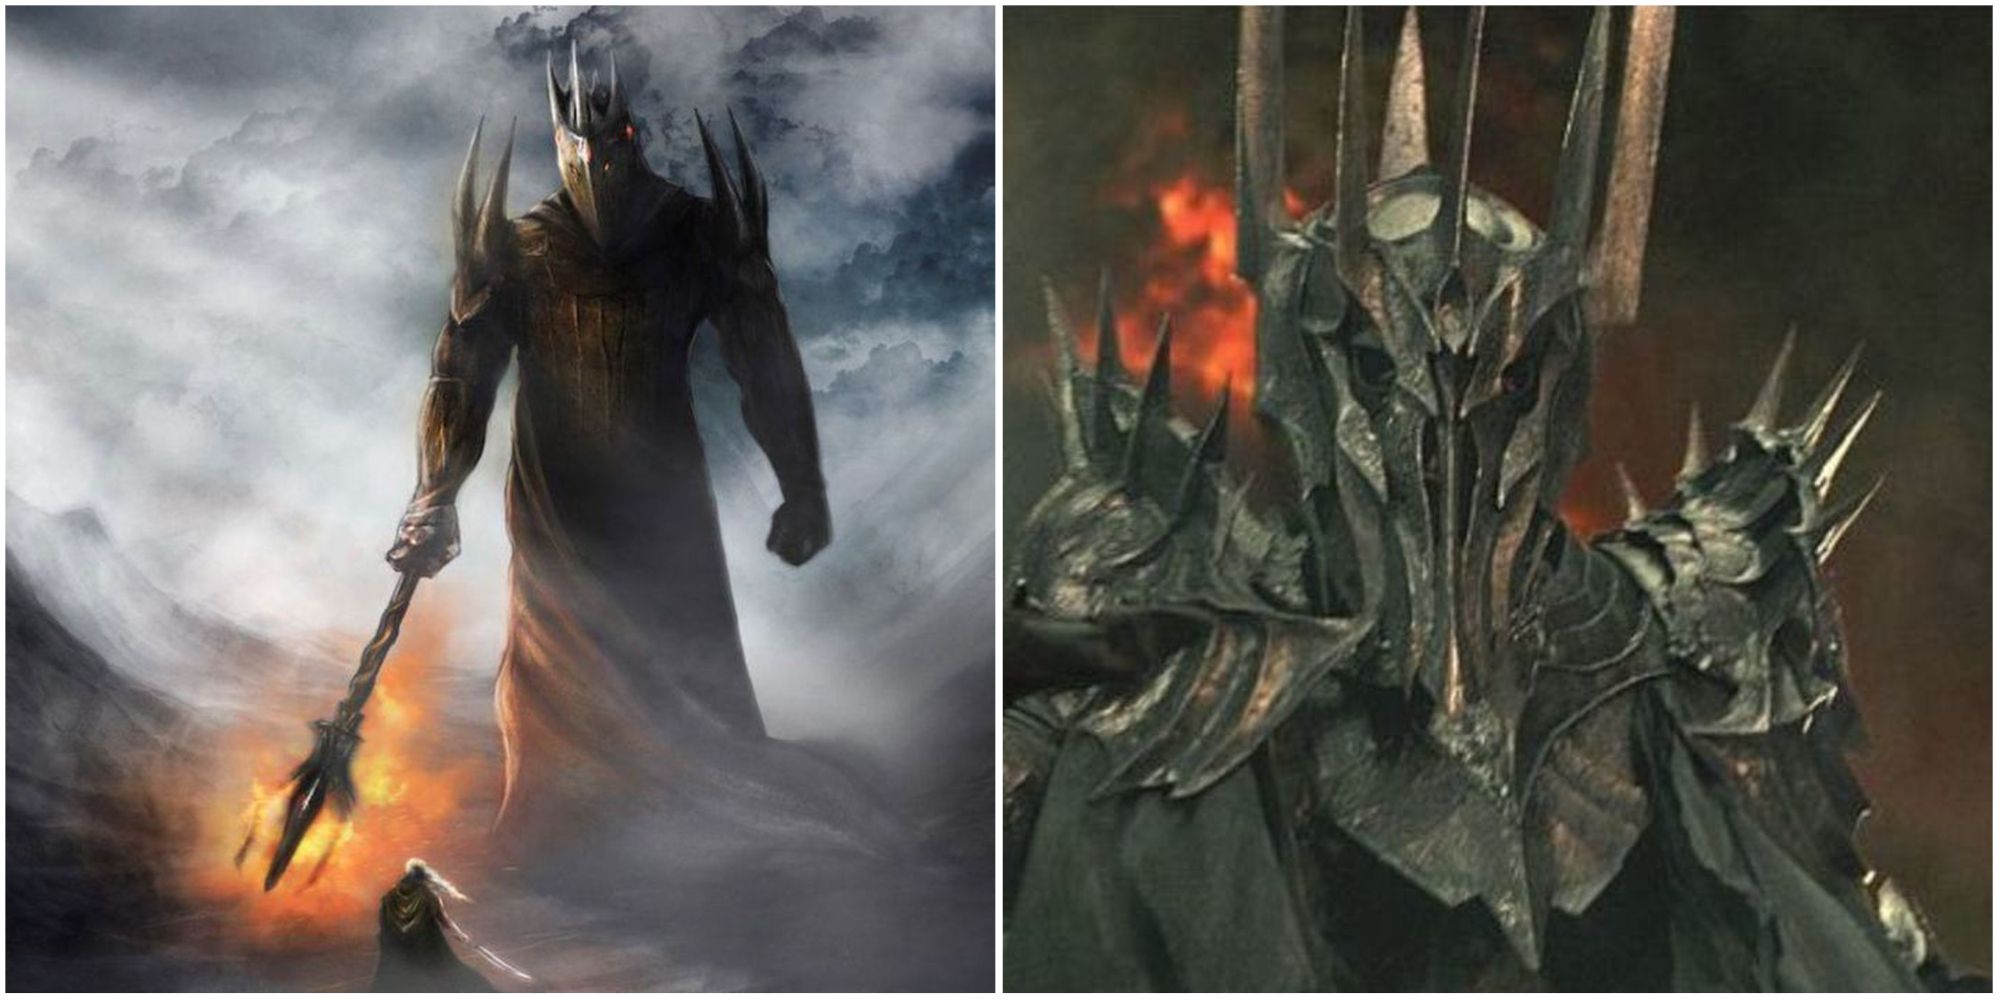 Why is Morgoth's face not shown in The Lord of the Rings? - Quora